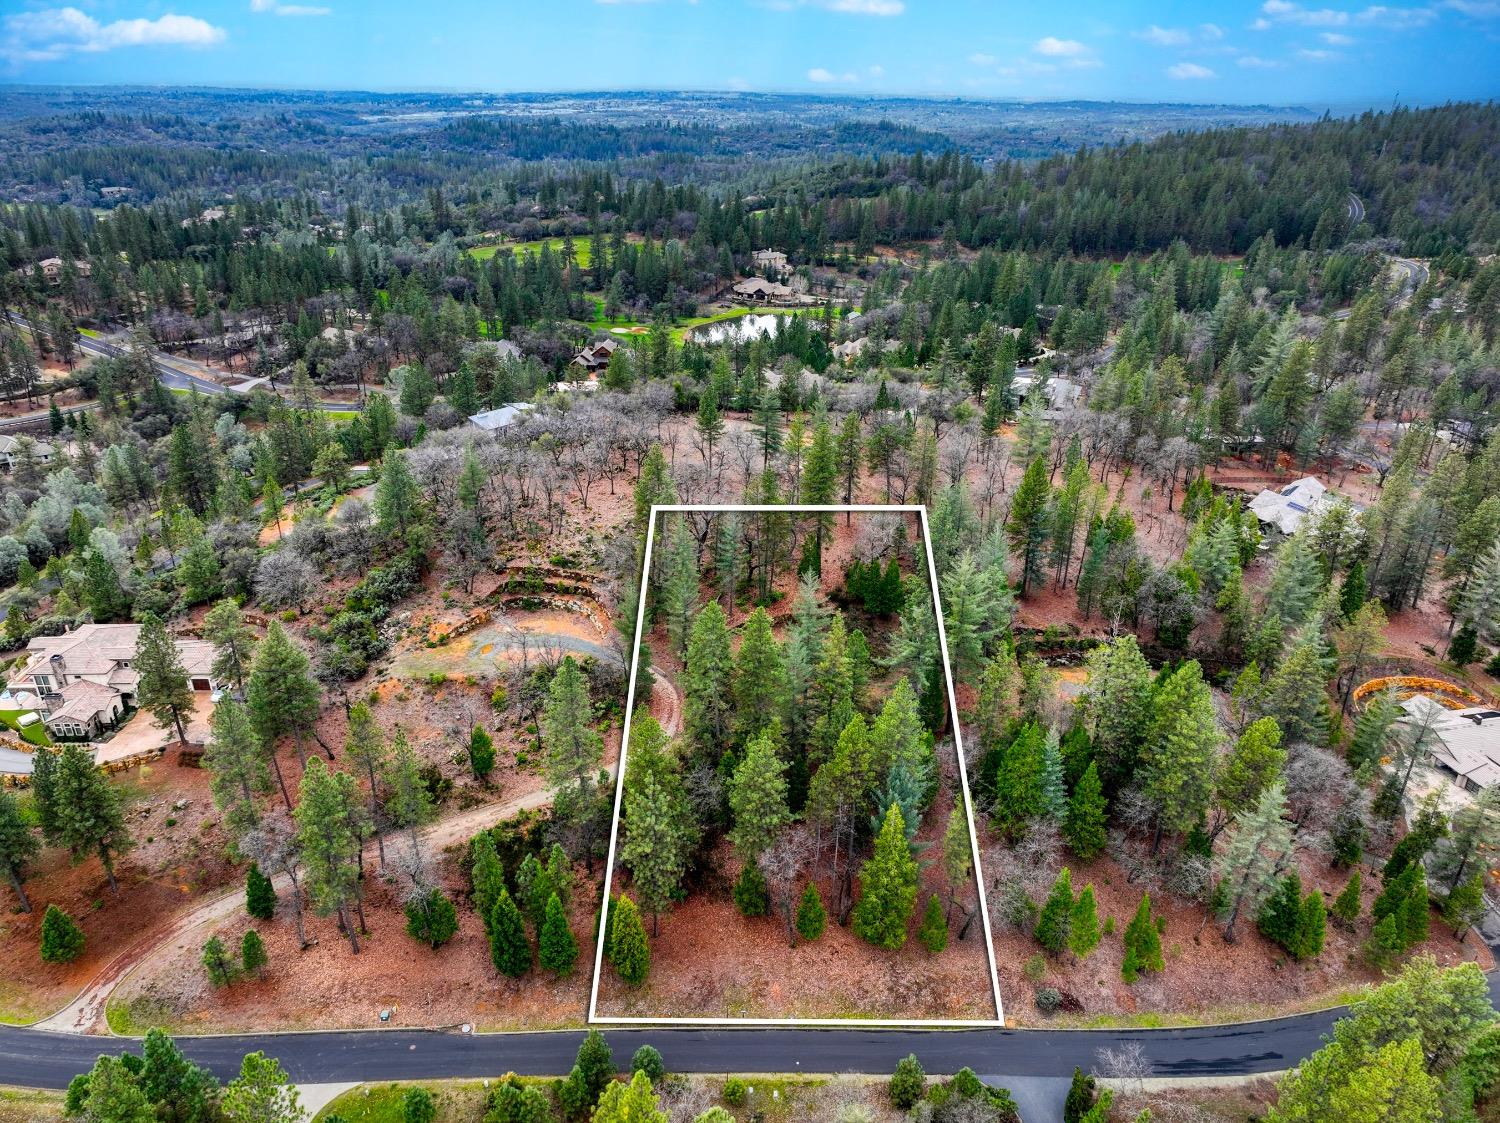 Photo of 15055 Grand Knoll Dr - Lot 284 in Meadow Vista, CA